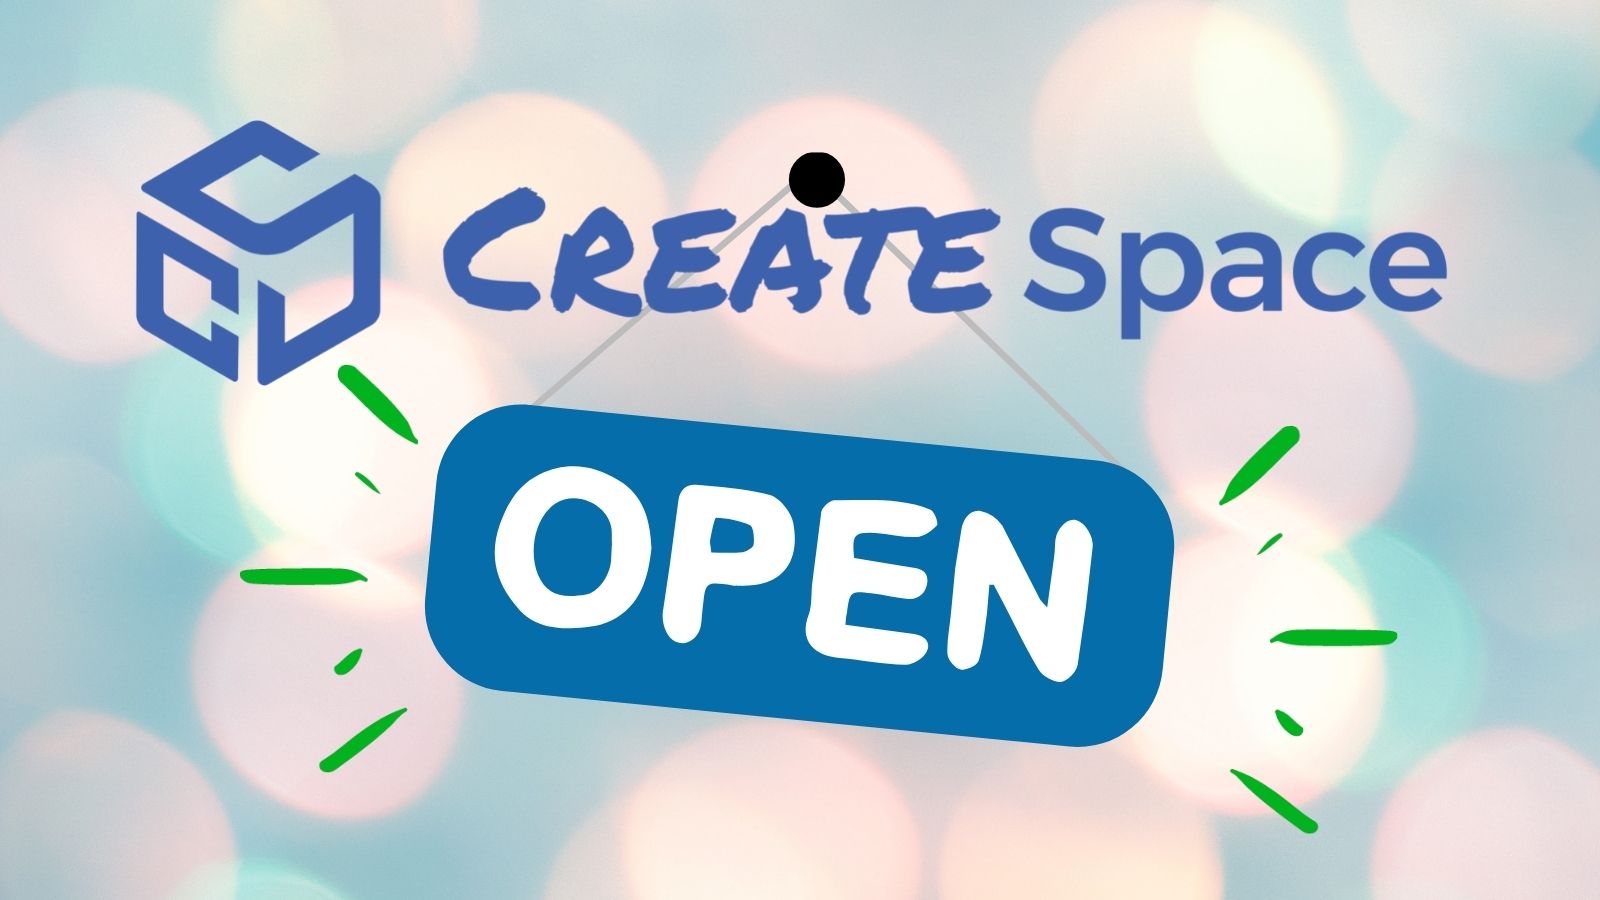 CreateSpace logo with open sign hanging from the text